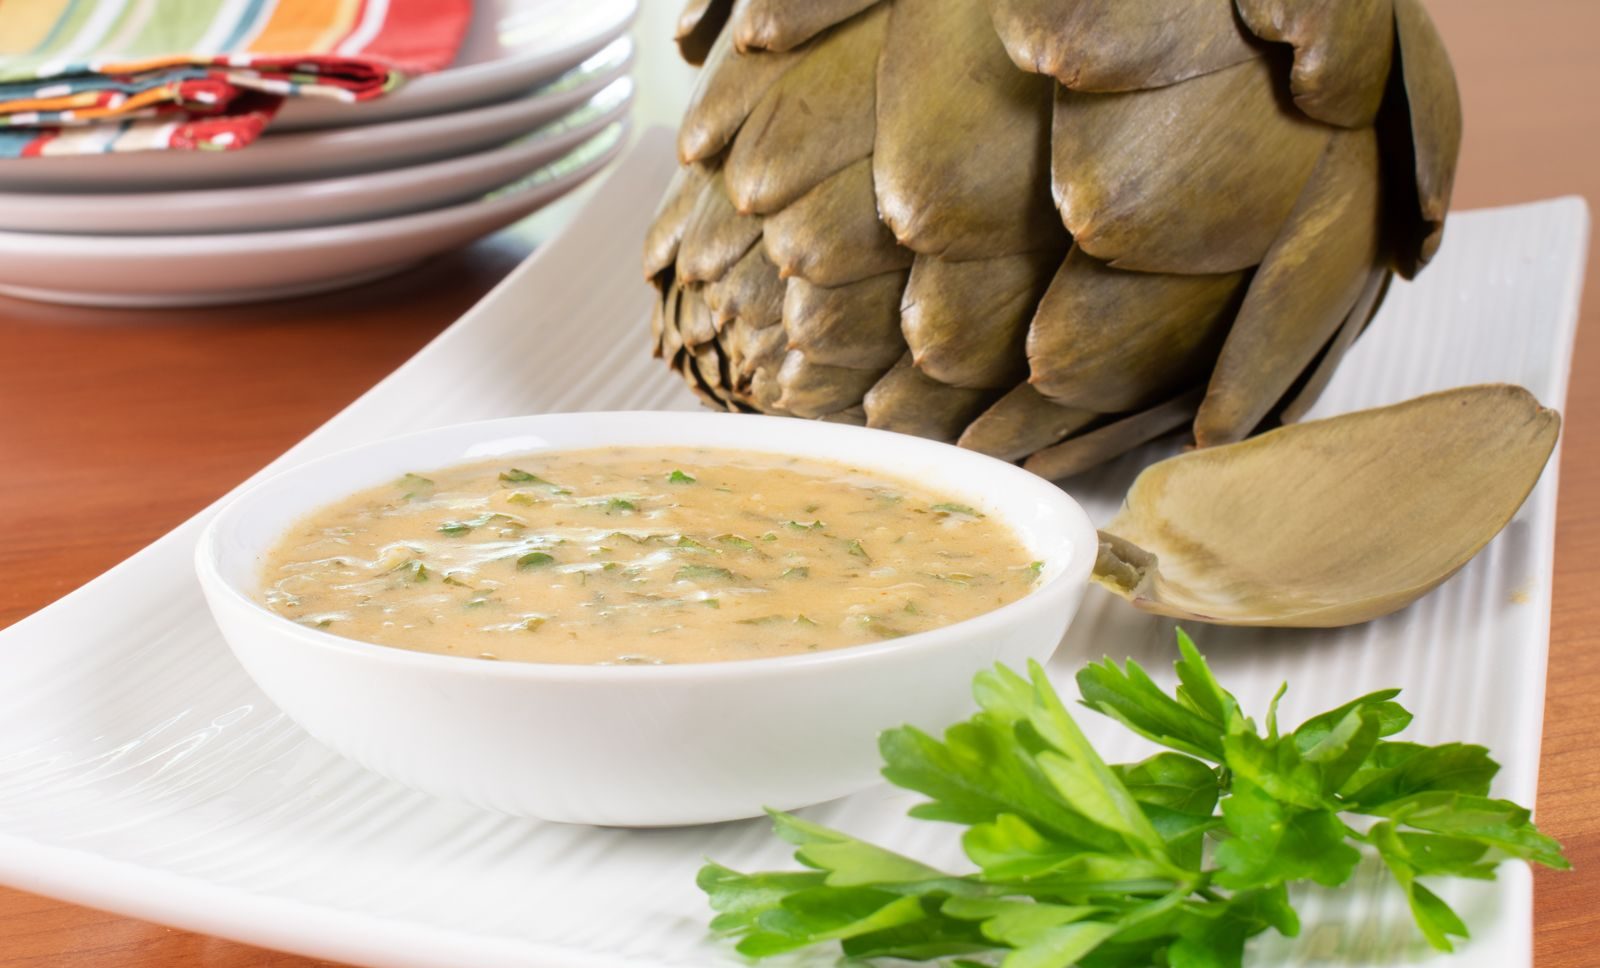 Tasty & Easy Cowboy Butter Dipping Sauce Recipe